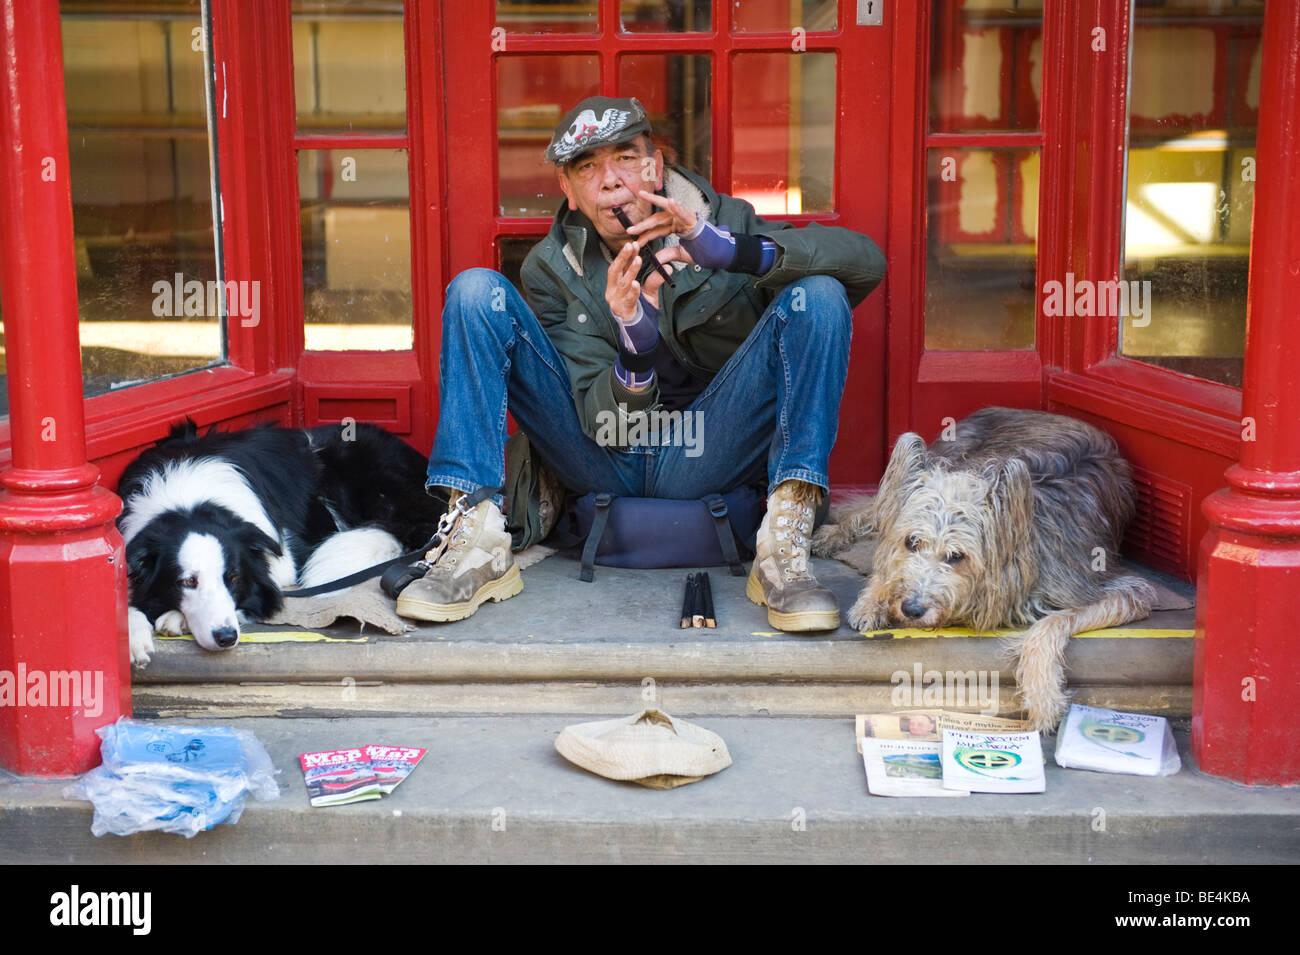 Man sat in doorway playing flute with two dogs during Ludlow Food Festival Shropshire England UK Stock Photo